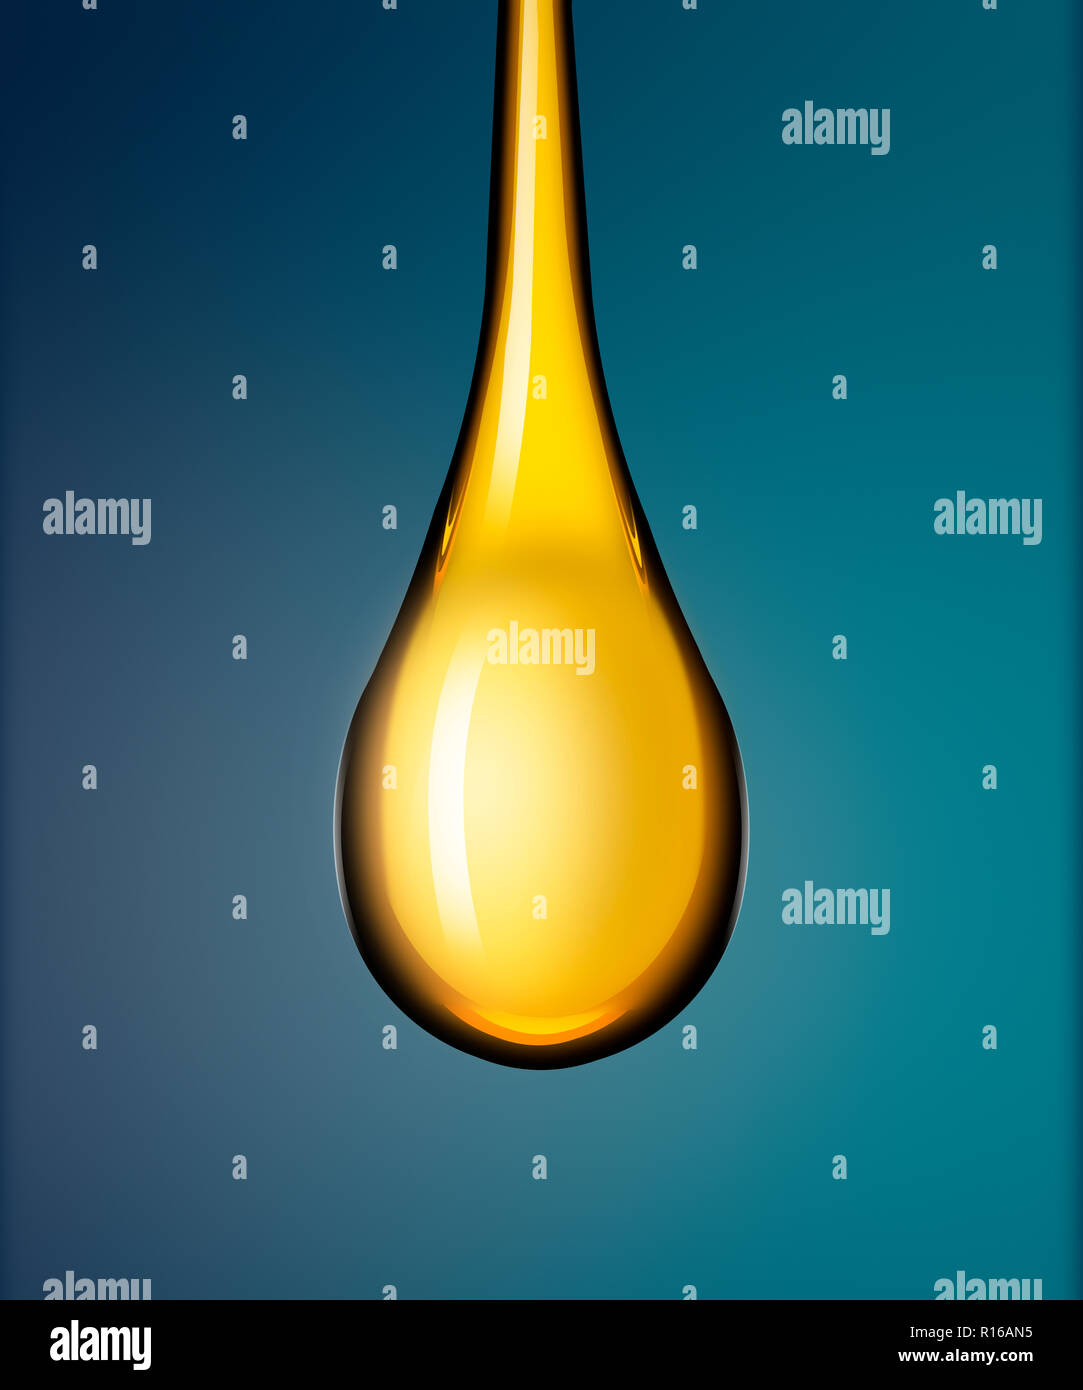 Droplet of golden liquid about to drop against blue background Stock Photo